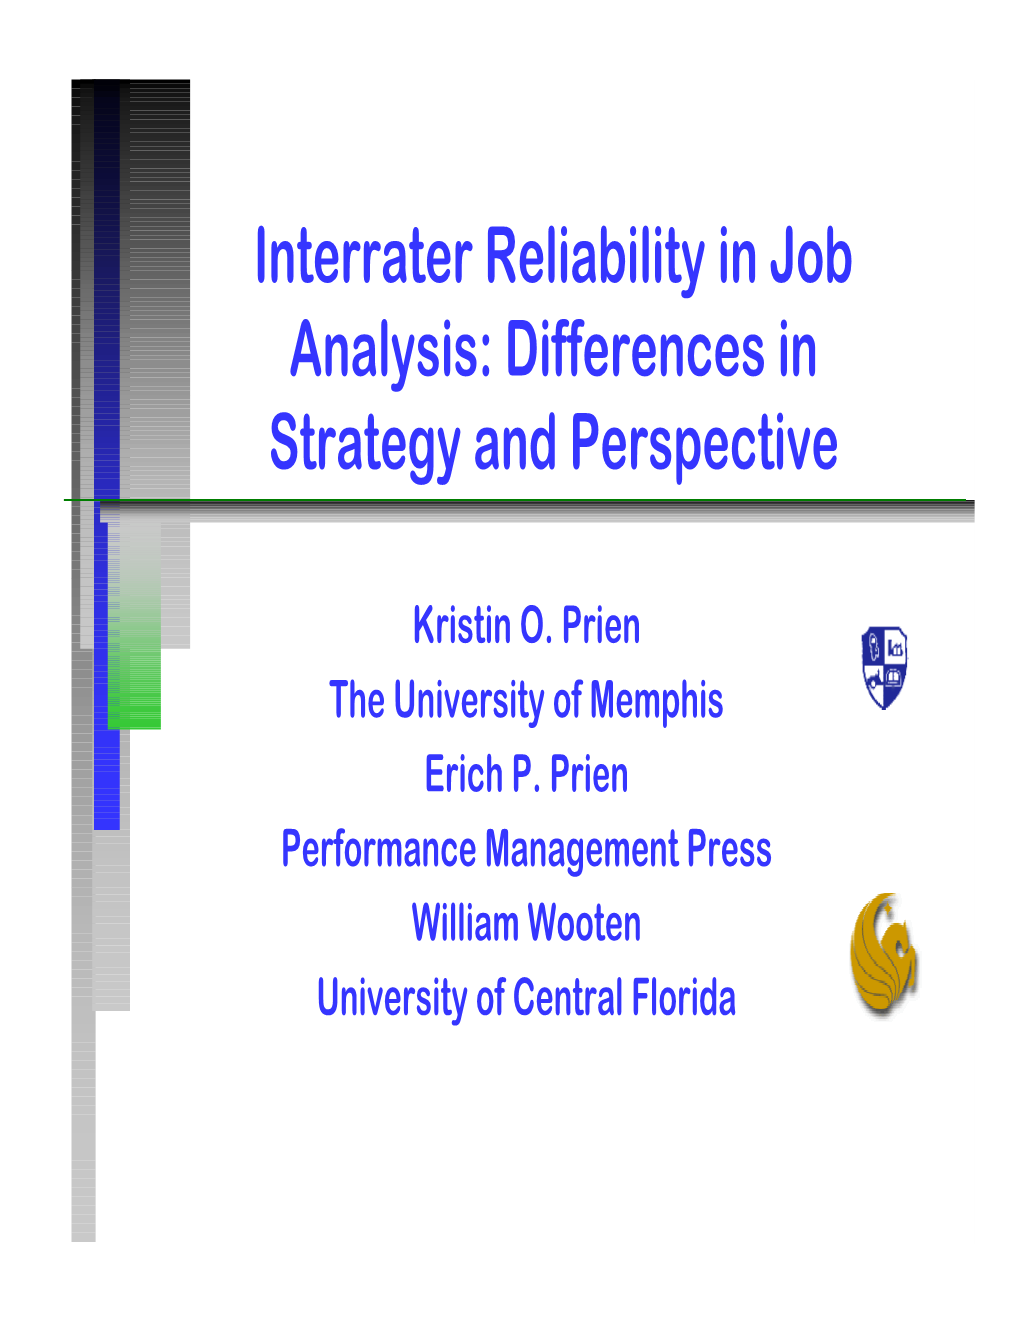 Interrater Reliability in Job Analysis: Differences in Strategy and Perspective